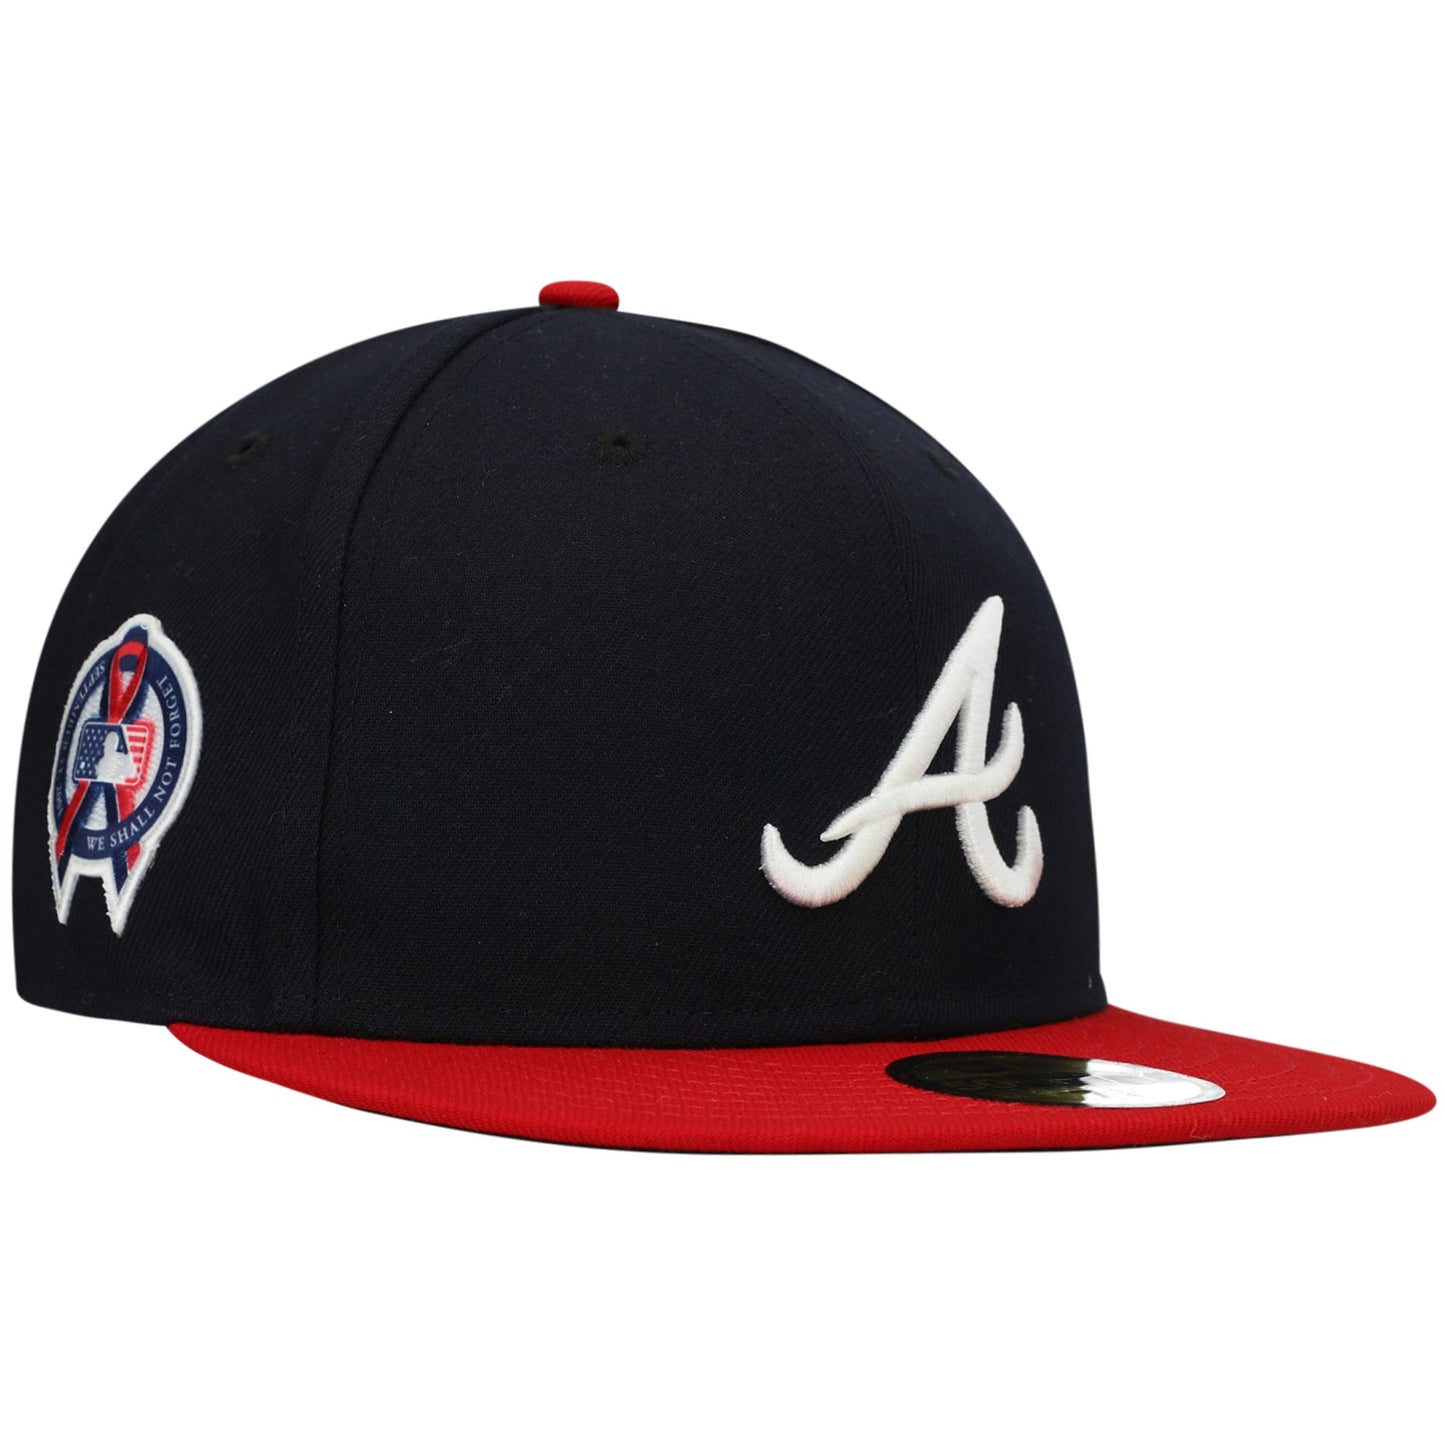 Atlanta Braves New Era 9/11 Memorial Side Patch 59FIFTY Fitted Hat - Navy